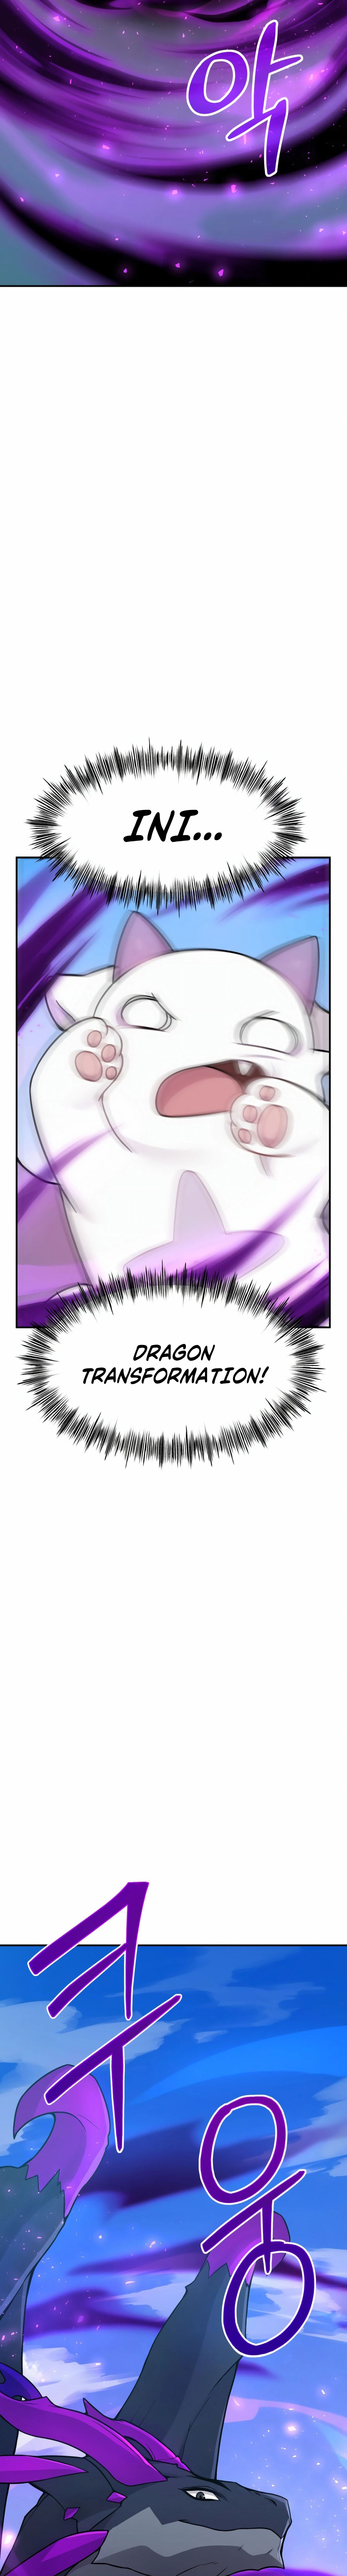 How to Survive as a Terminally-Ill Dragon Chapter 03 Image 8